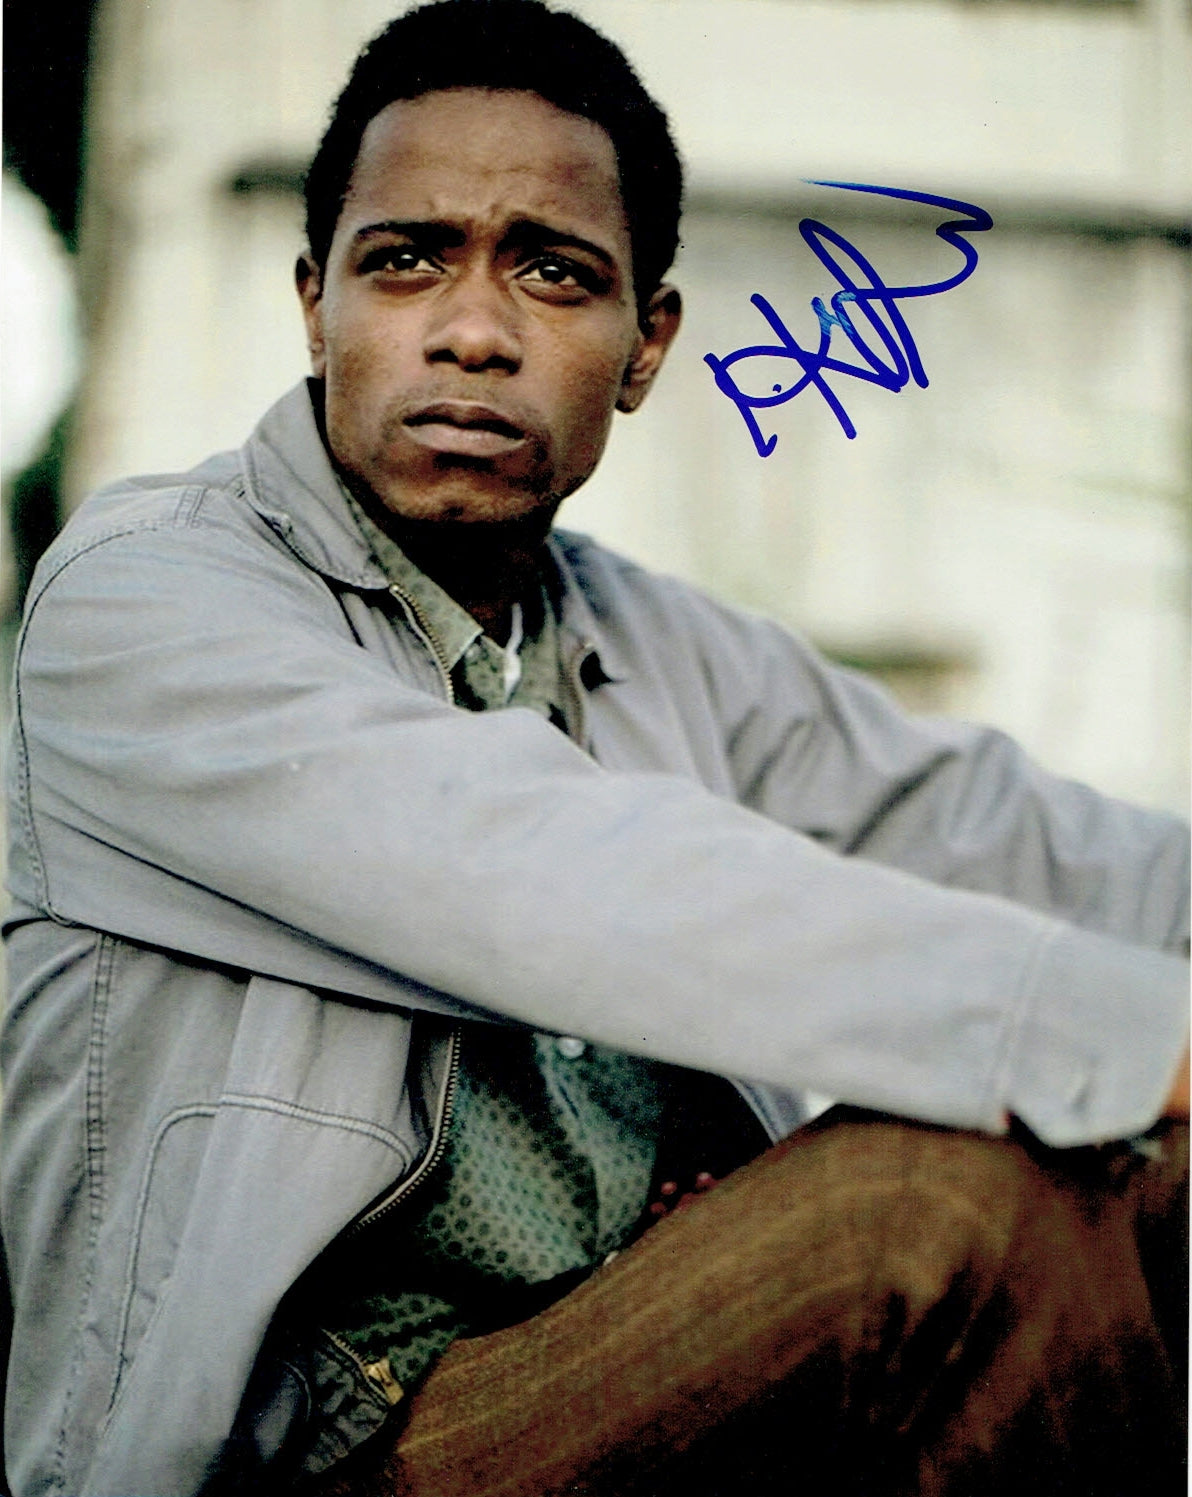 Lakeith Stanfield Signed 8x10 Photo